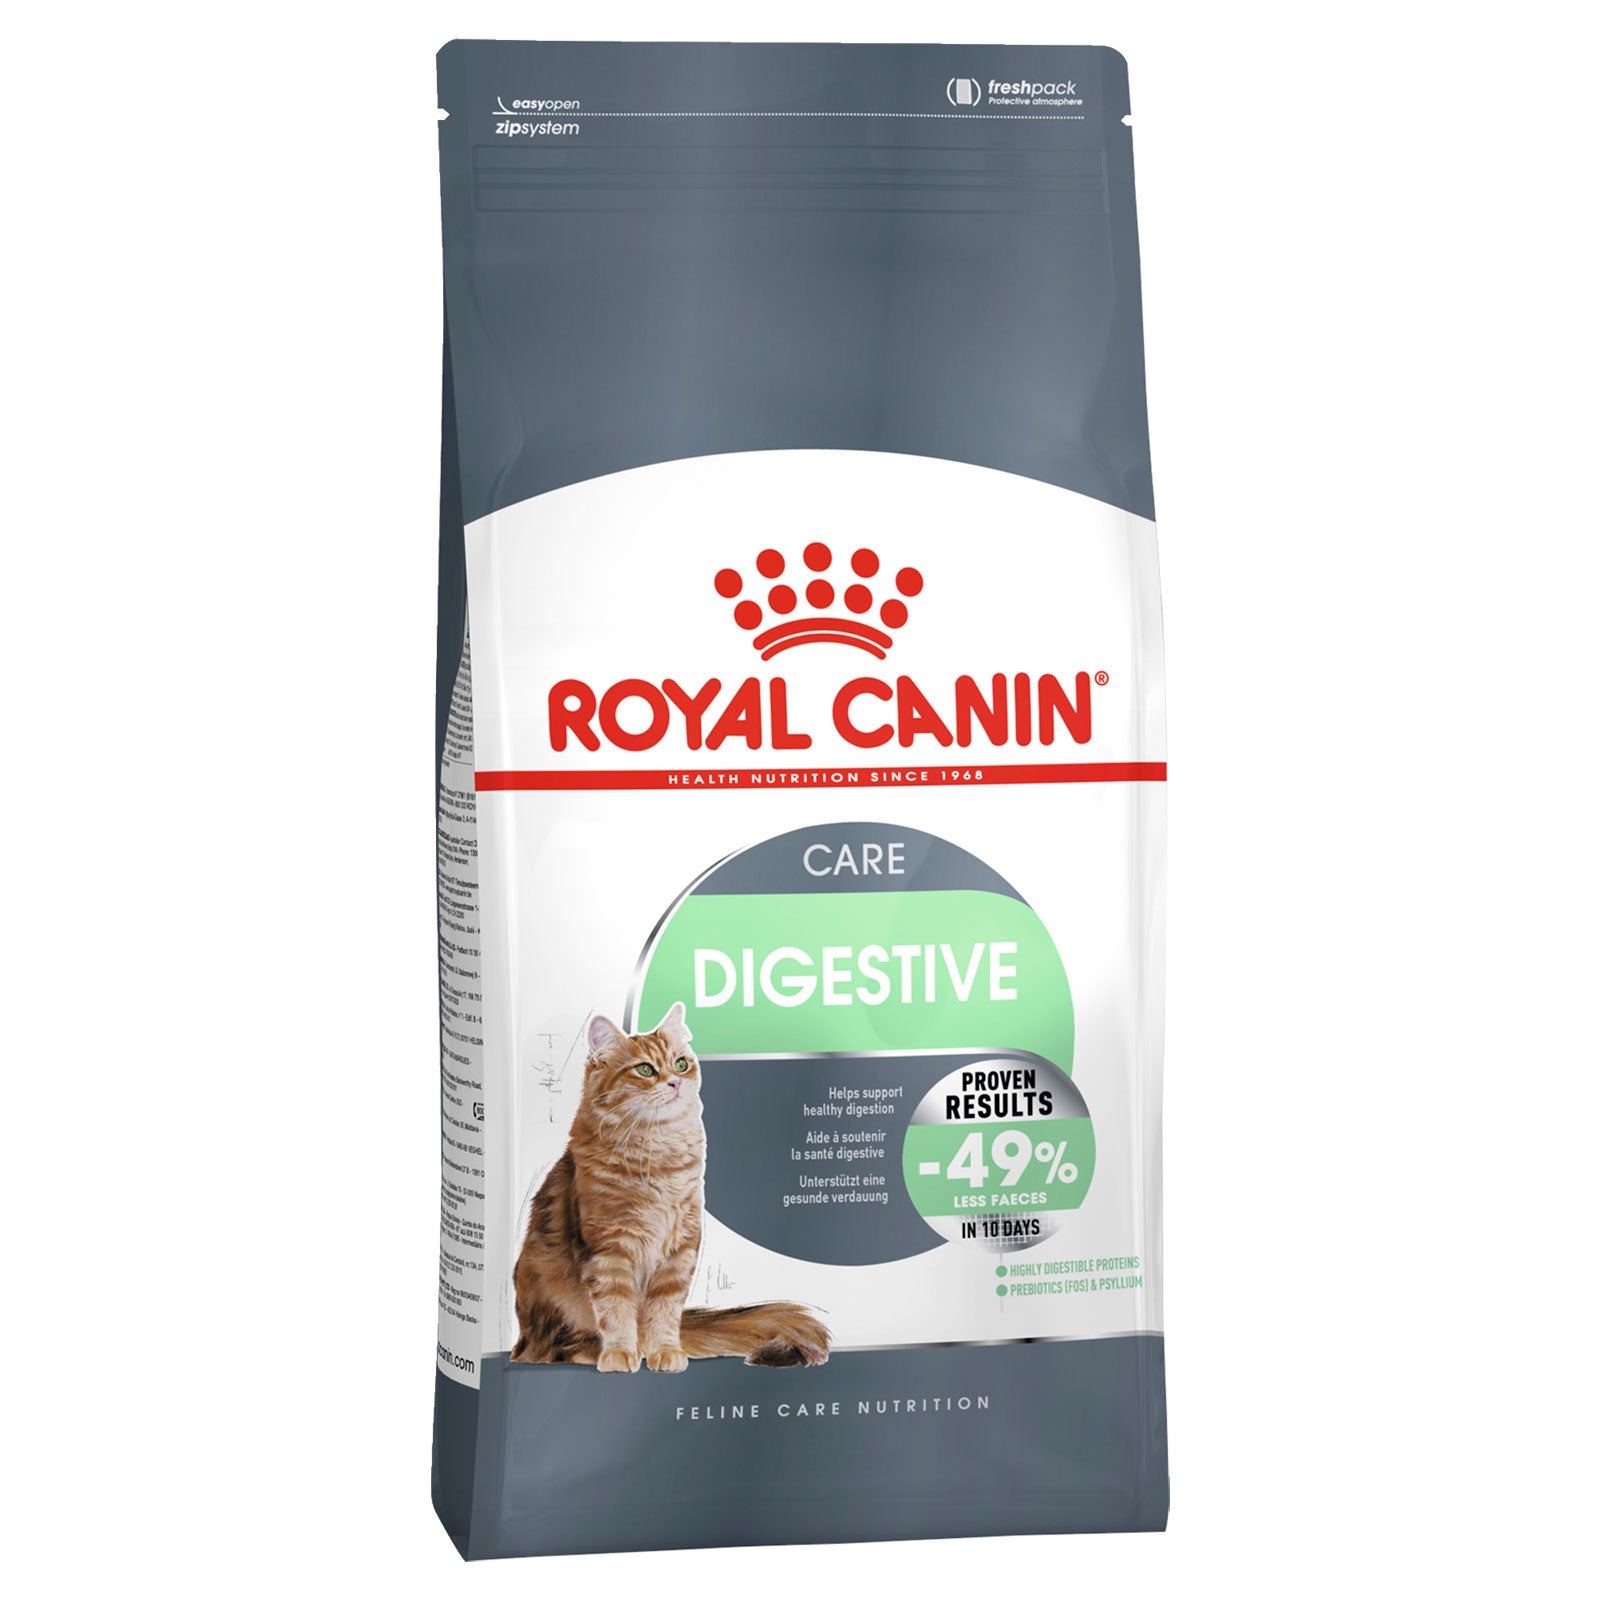 Royal Canin Cat Food Adult Digestive Care